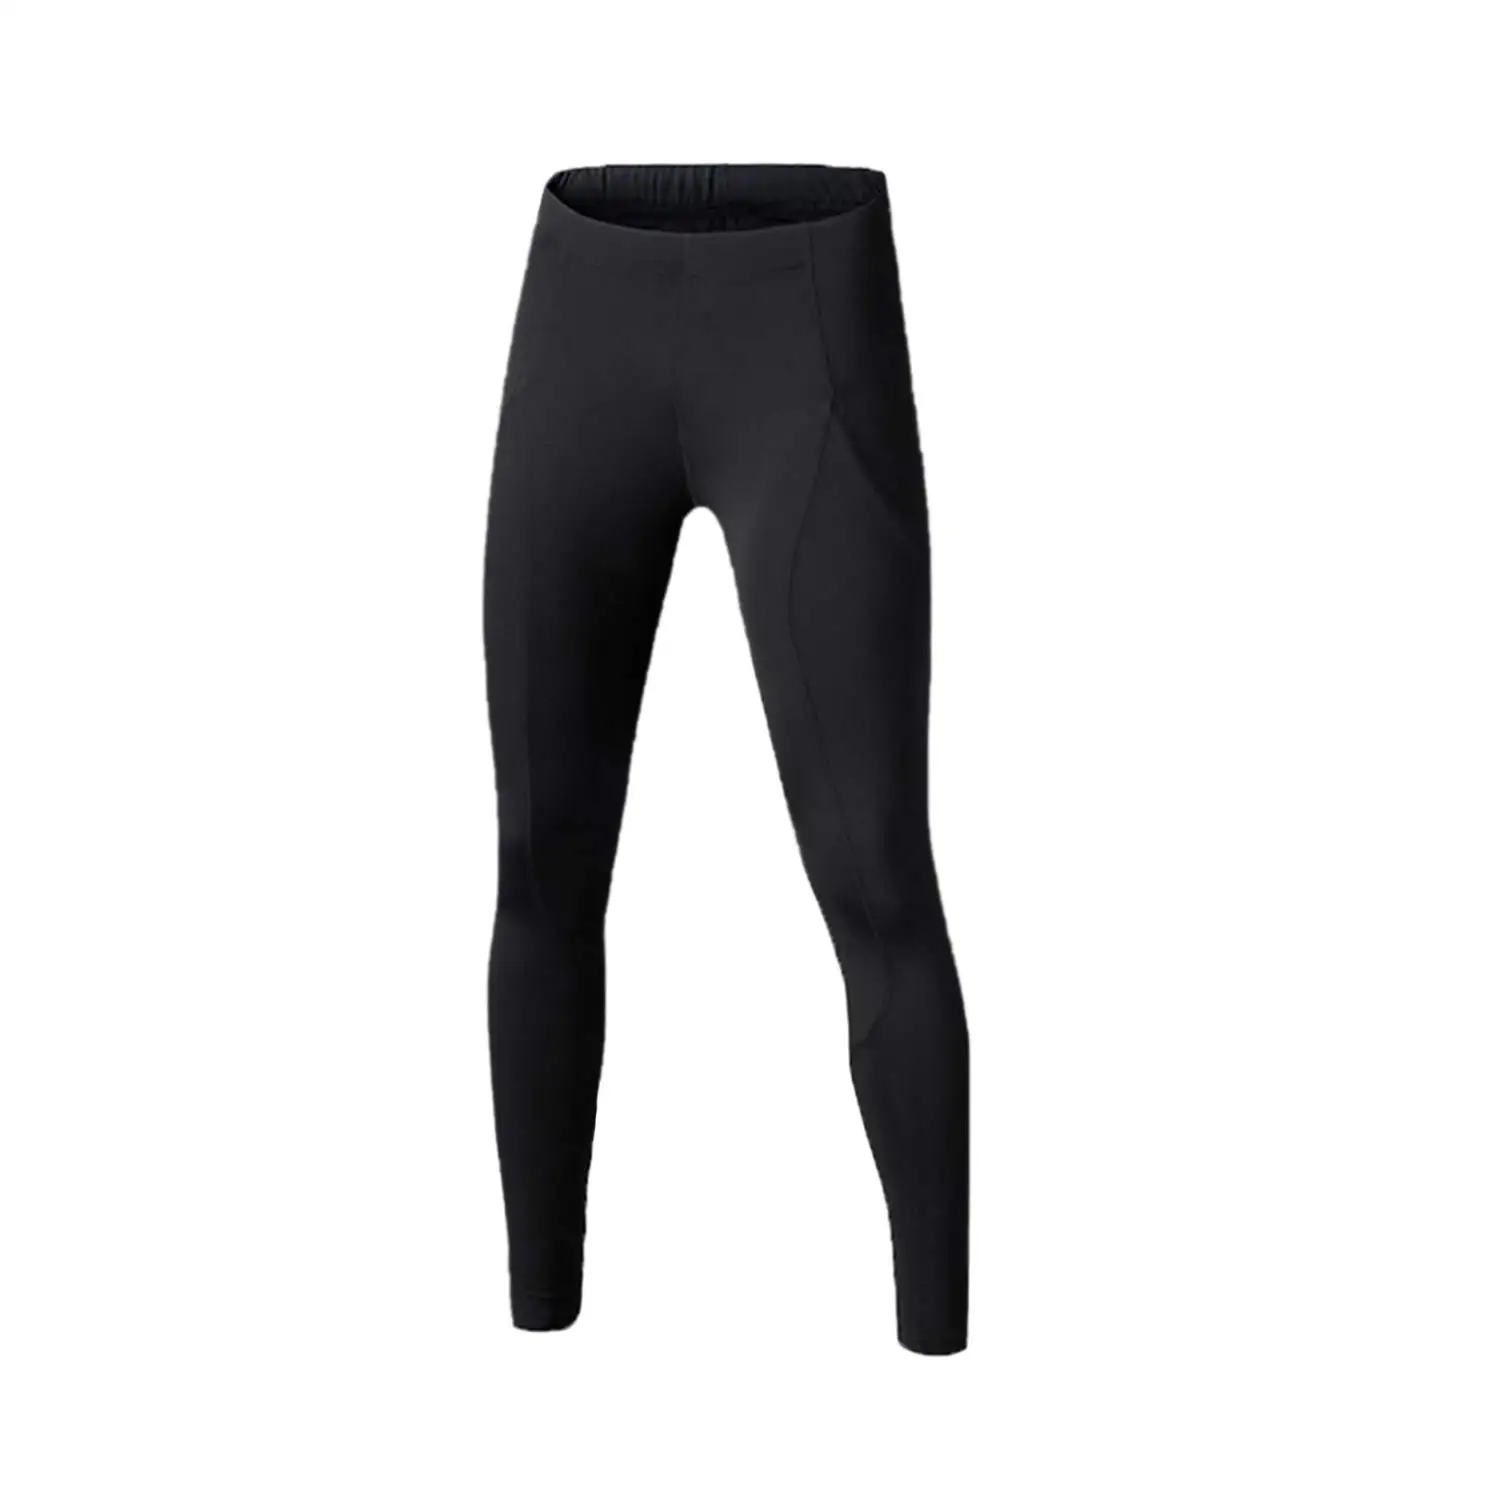 RlaGed Youth Boys Compression Leggings Pants Quick Dry Football Basketball Sports Tights Athletic Baselayers for Kids 